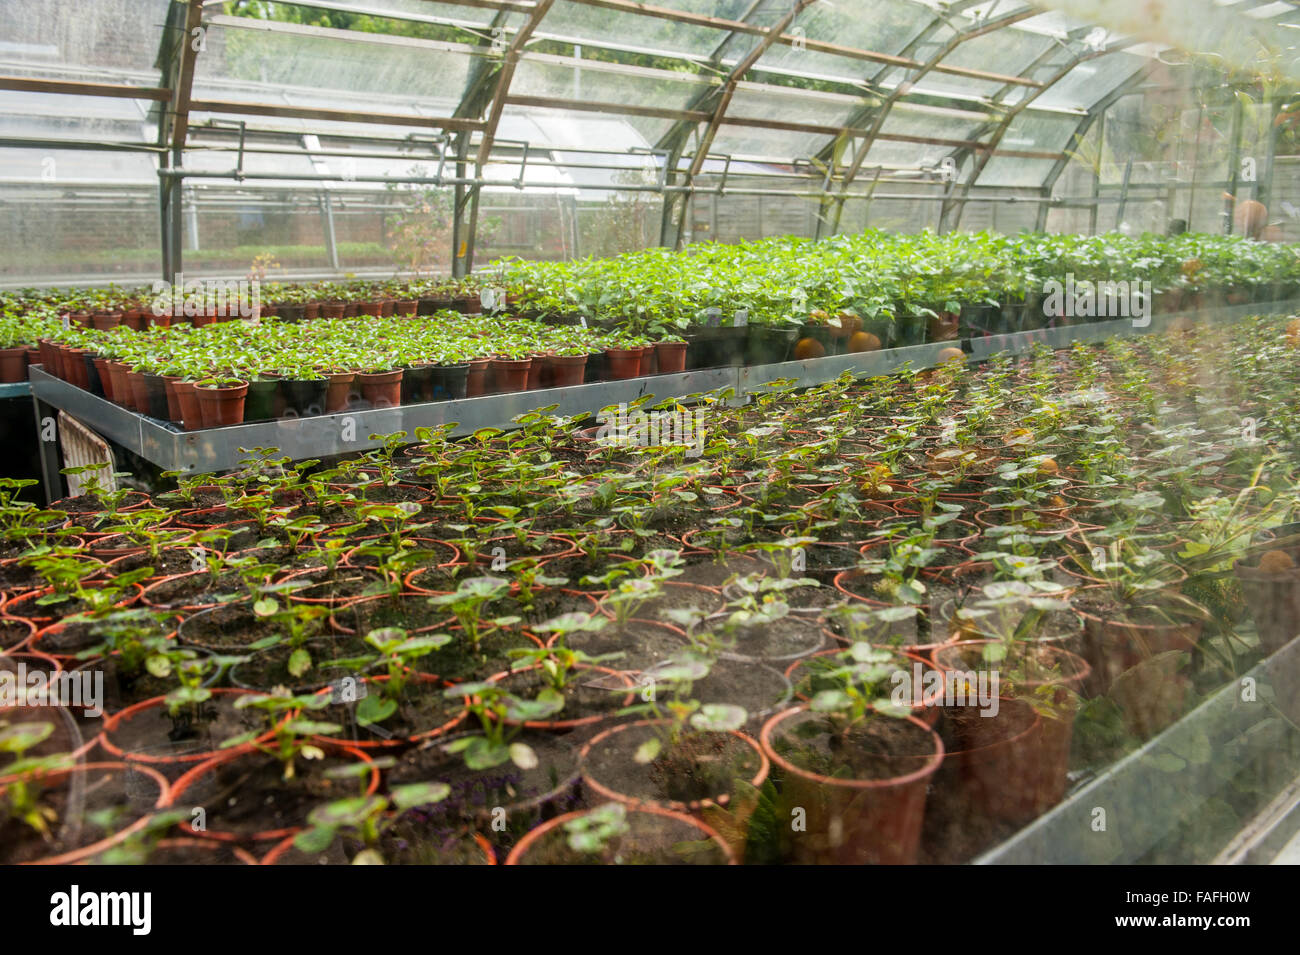 Inside a large industrial green house with plants in pots Stock Photo